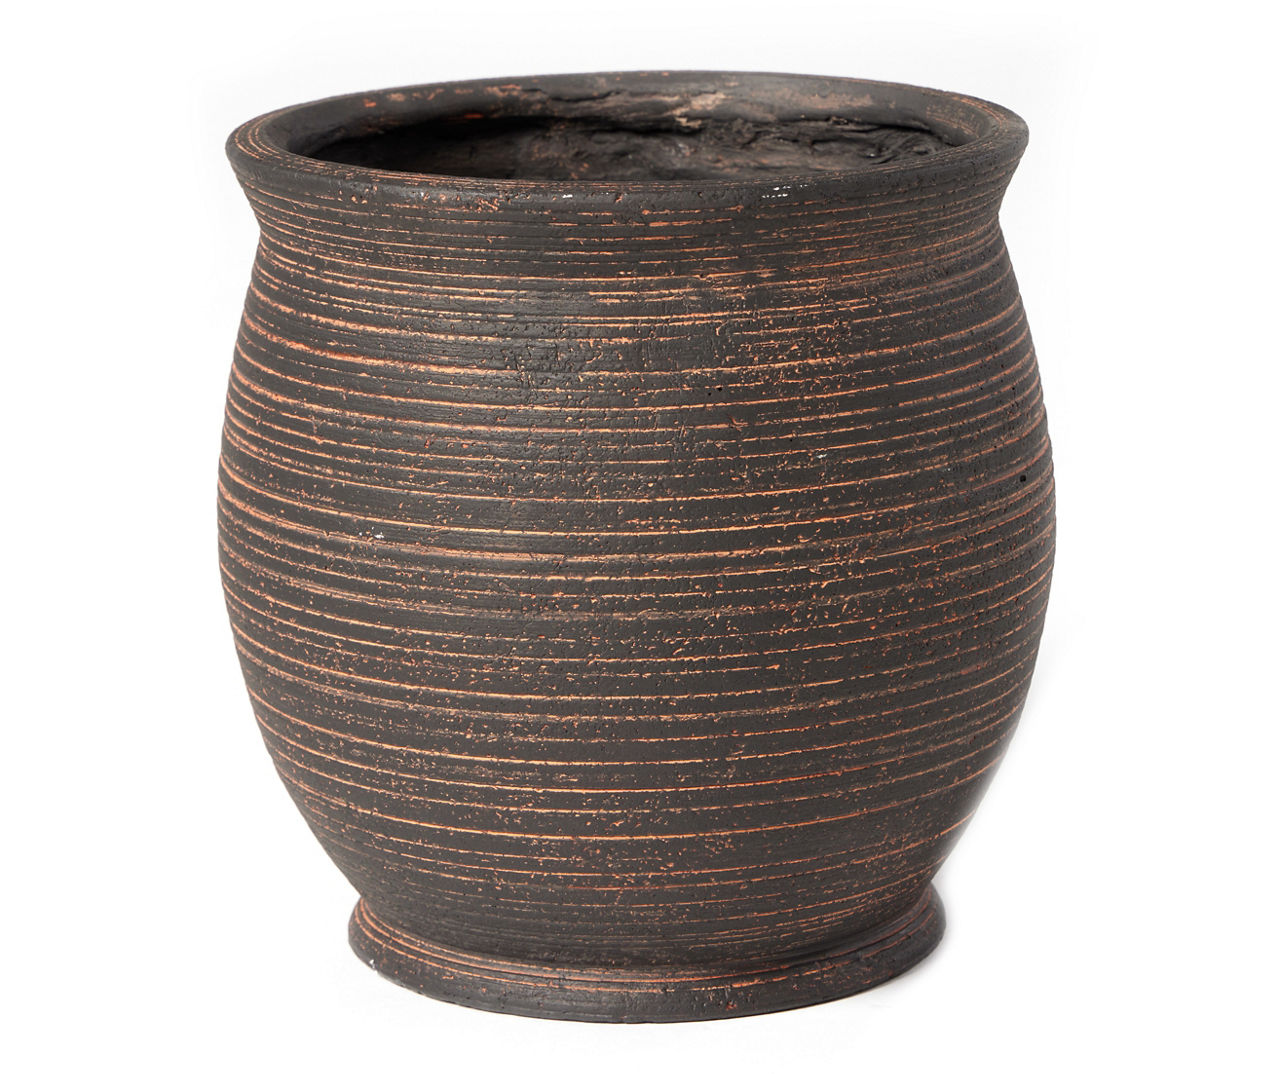 8" Brown Pottery Planter